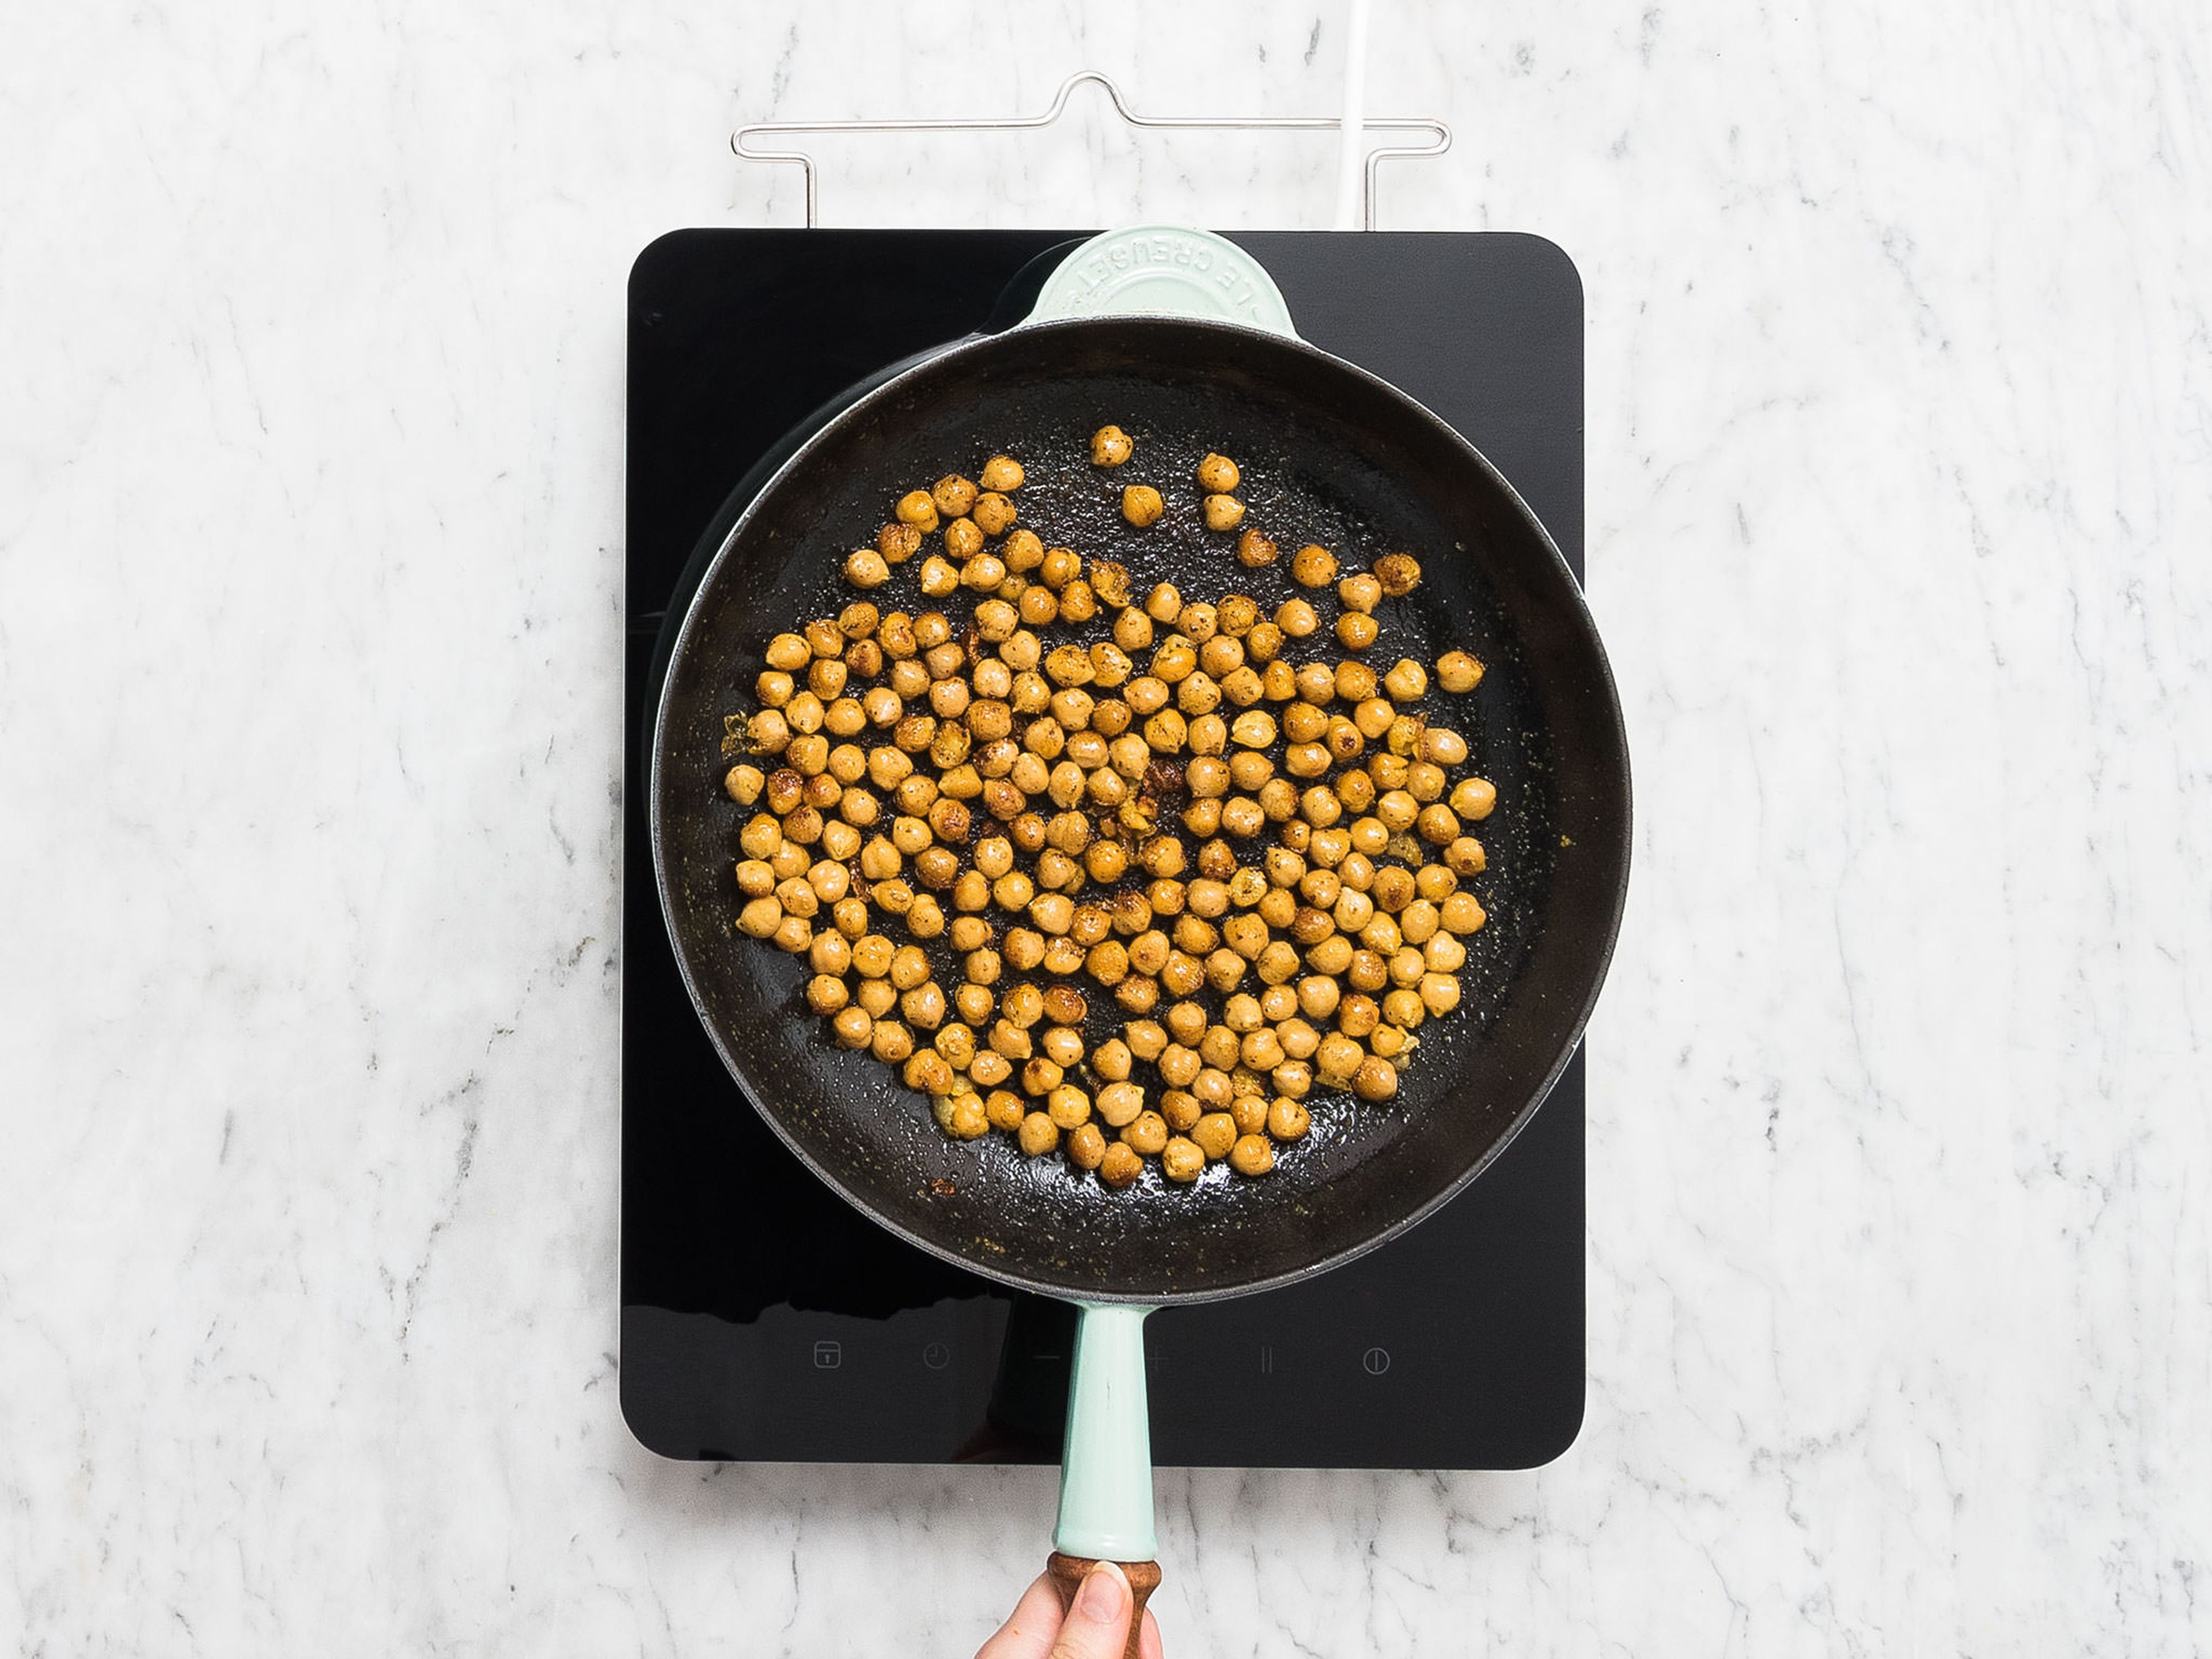 Rinse chickpeas until water runs clear, then pat dry. In a large bowl, mix chickpeas, curry powder, olive oil, and garlic powder together and season with salt and pepper. Heat a frying pan over medium-high heat and fry chickpeas for approx. 5 min., or until golden brown. Remove from pan and set aside.